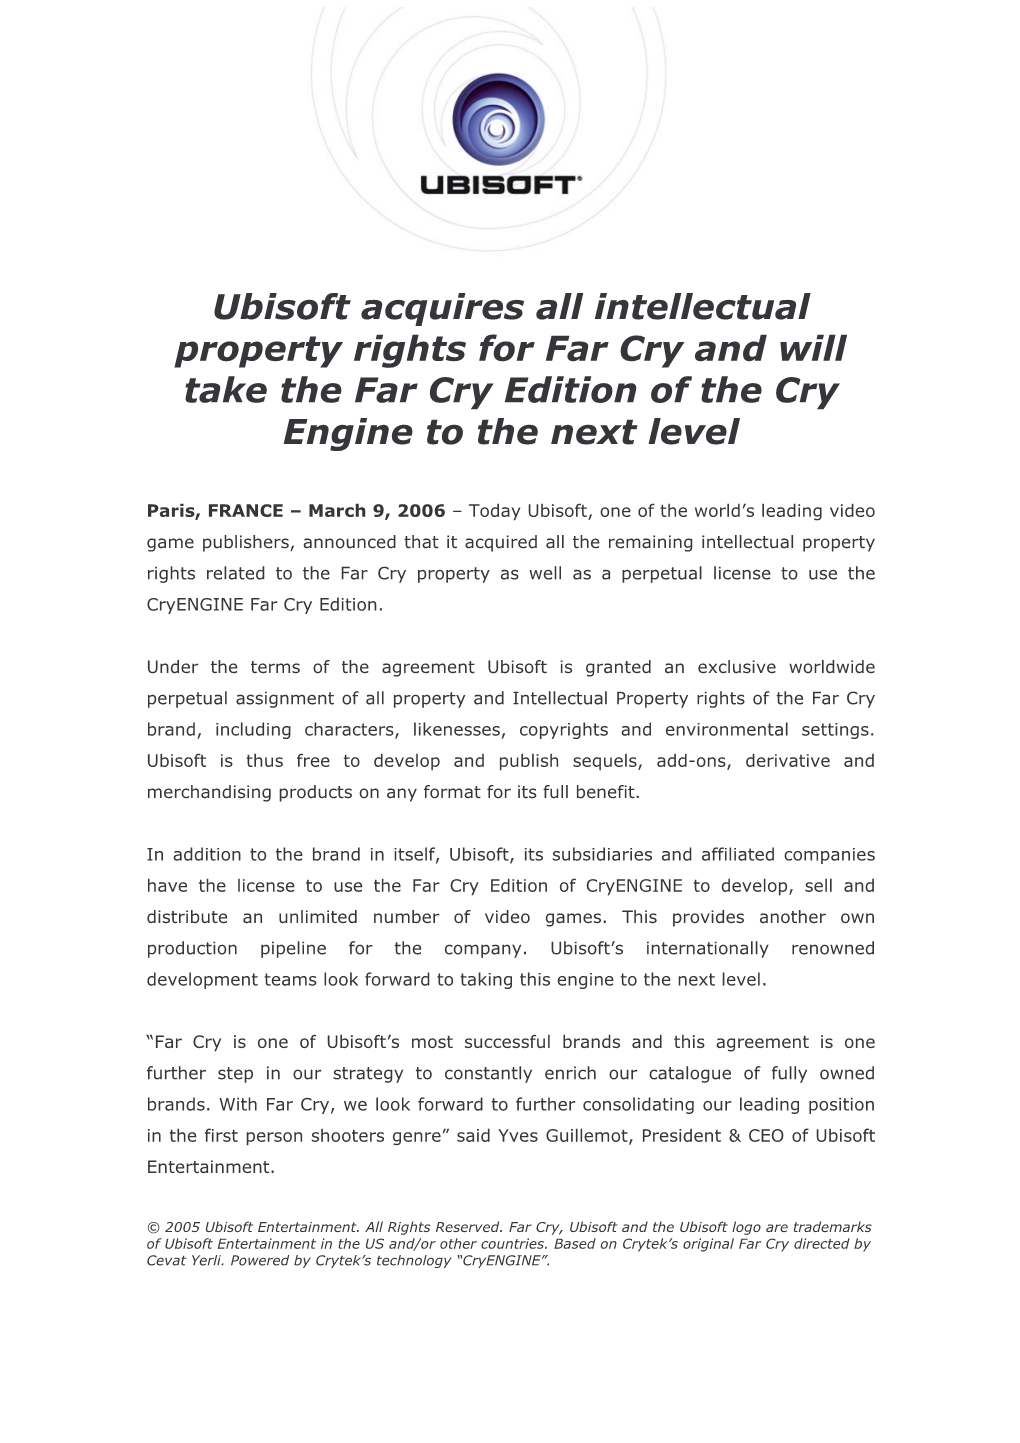 Ubisoft Acquires All Intellectual Property Rights for Far Cry and Will Take the Far Cry Edition of the Cry Engine to the Next Level